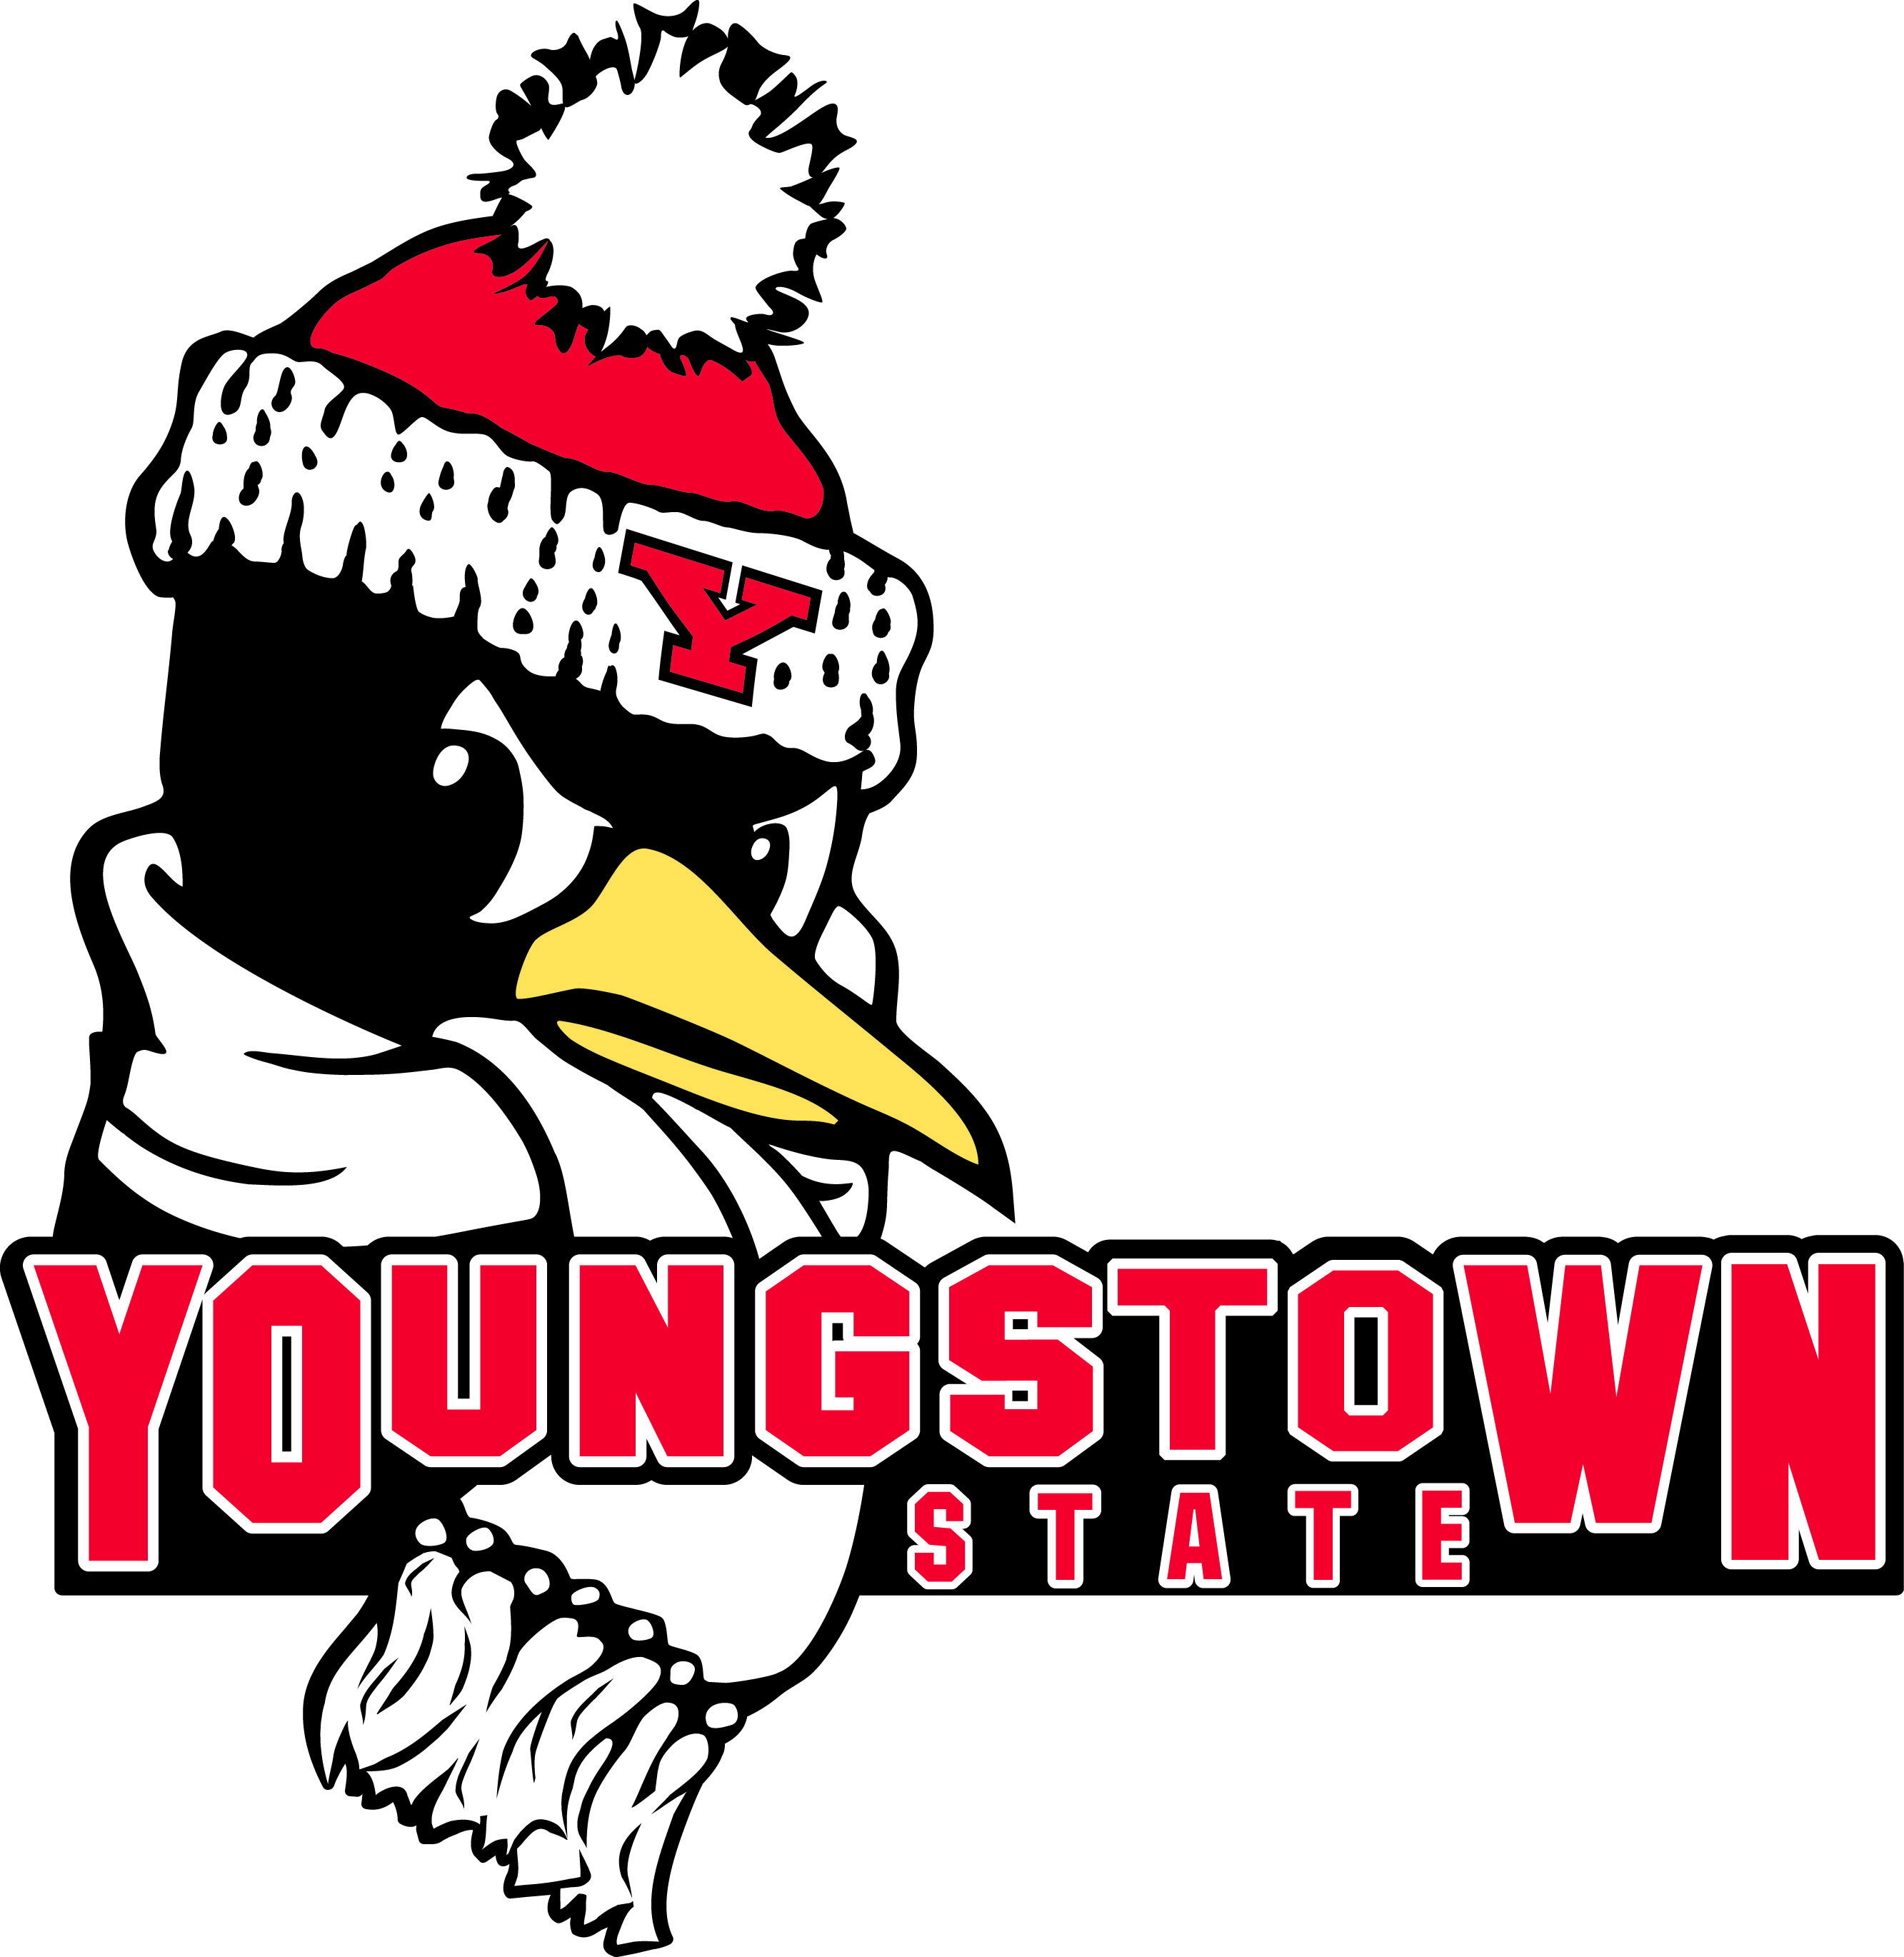 09.15.15 Youngstown State_pete